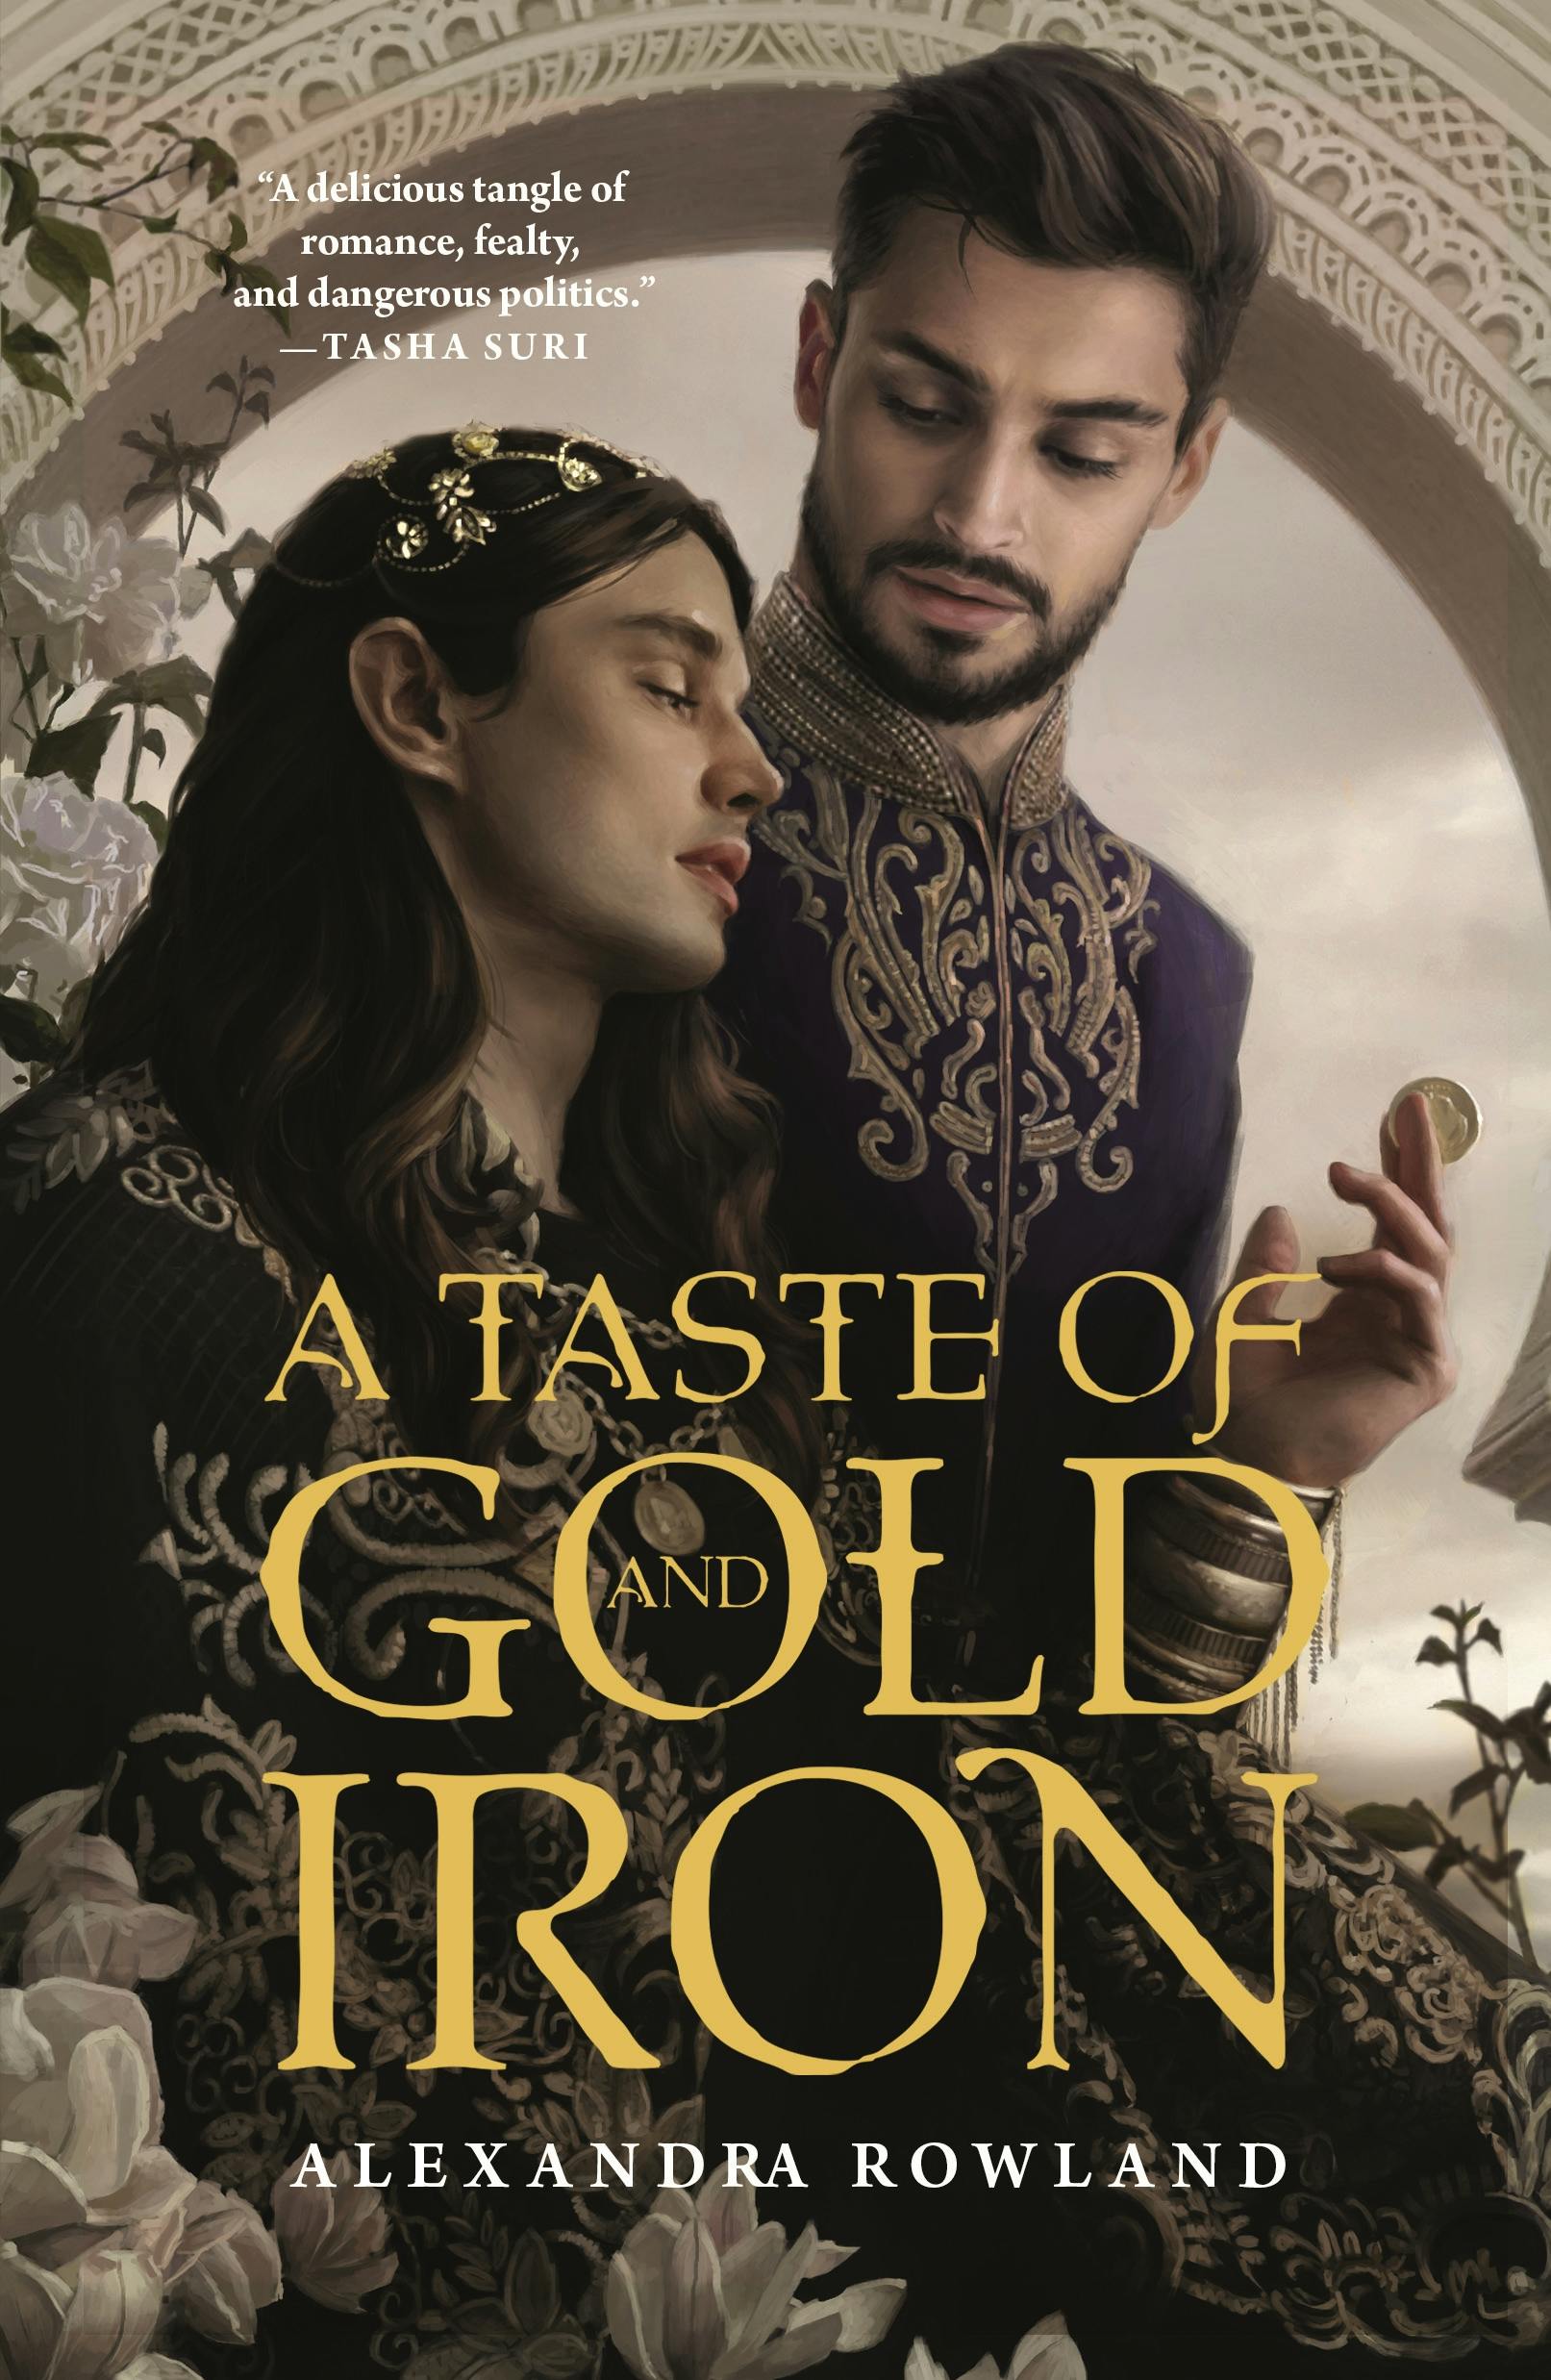 Cover for the book titled as: A Taste of Gold and Iron